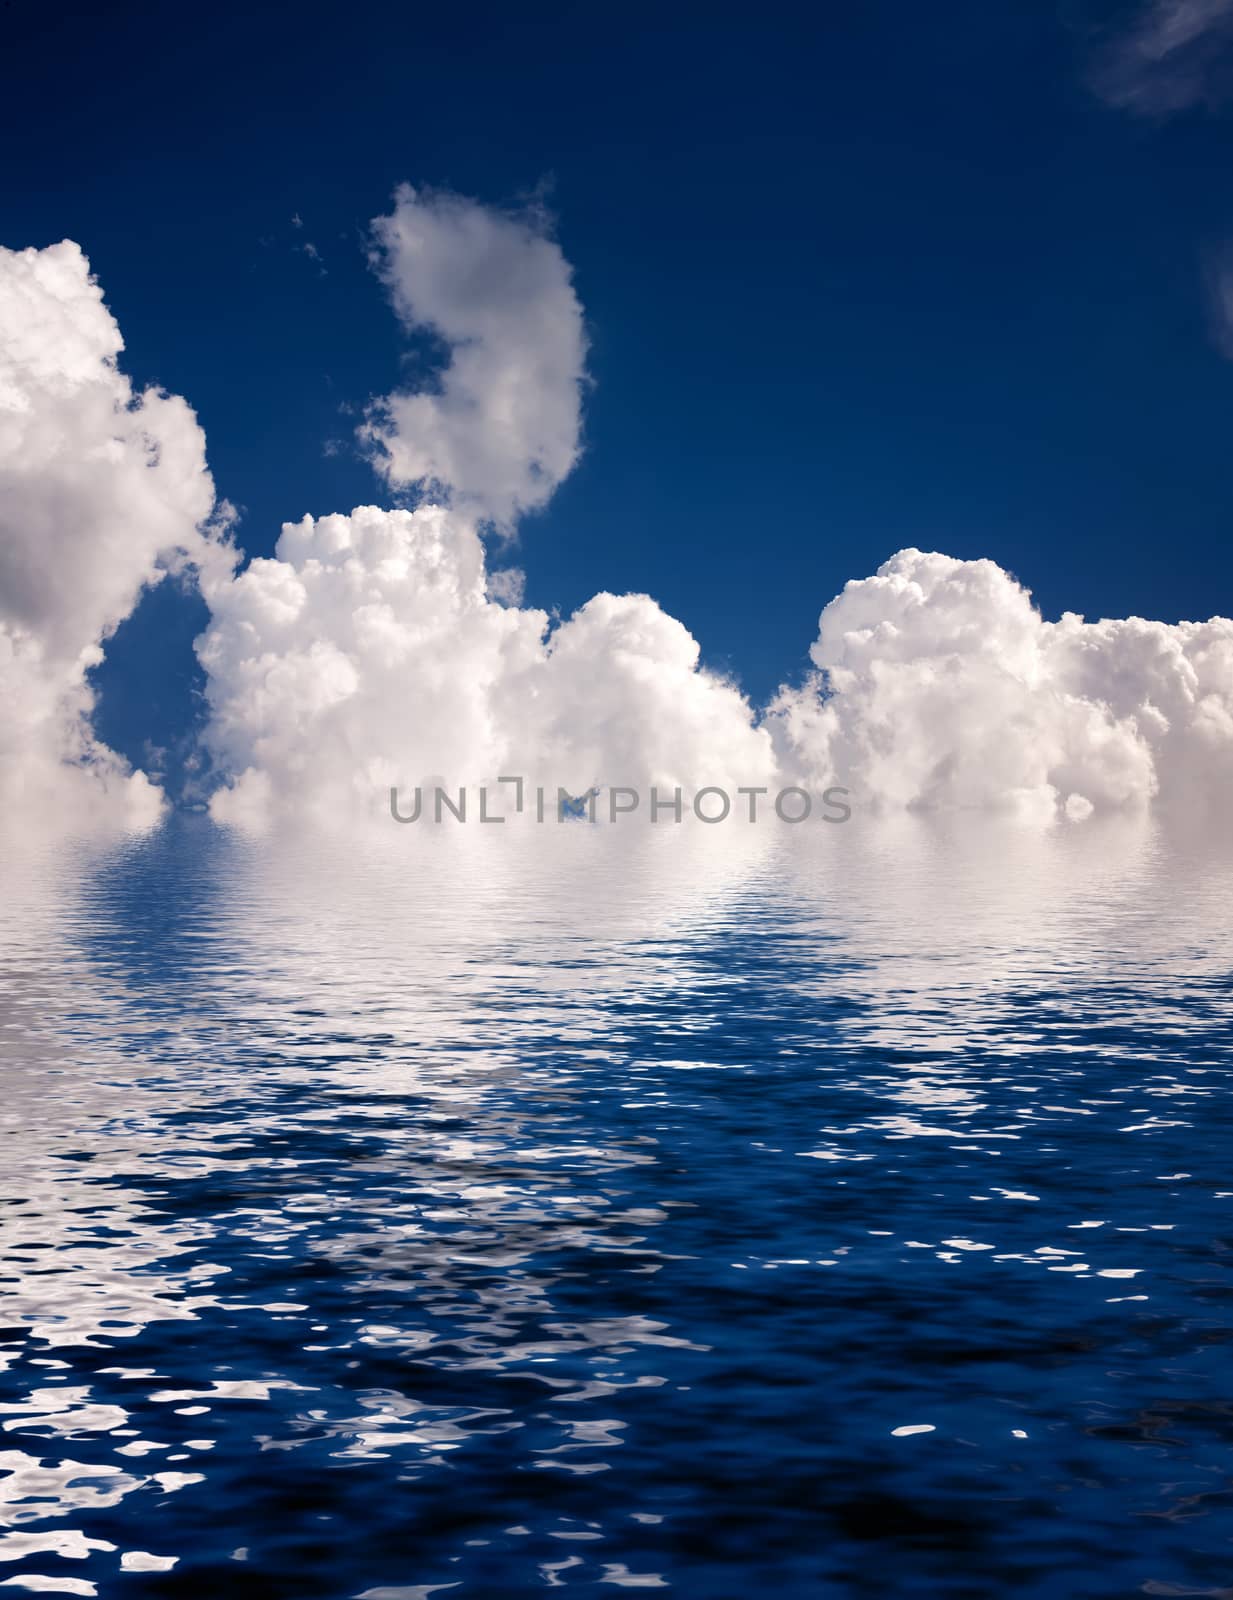 
Landscape: white clouds in the blue sky reflected in water